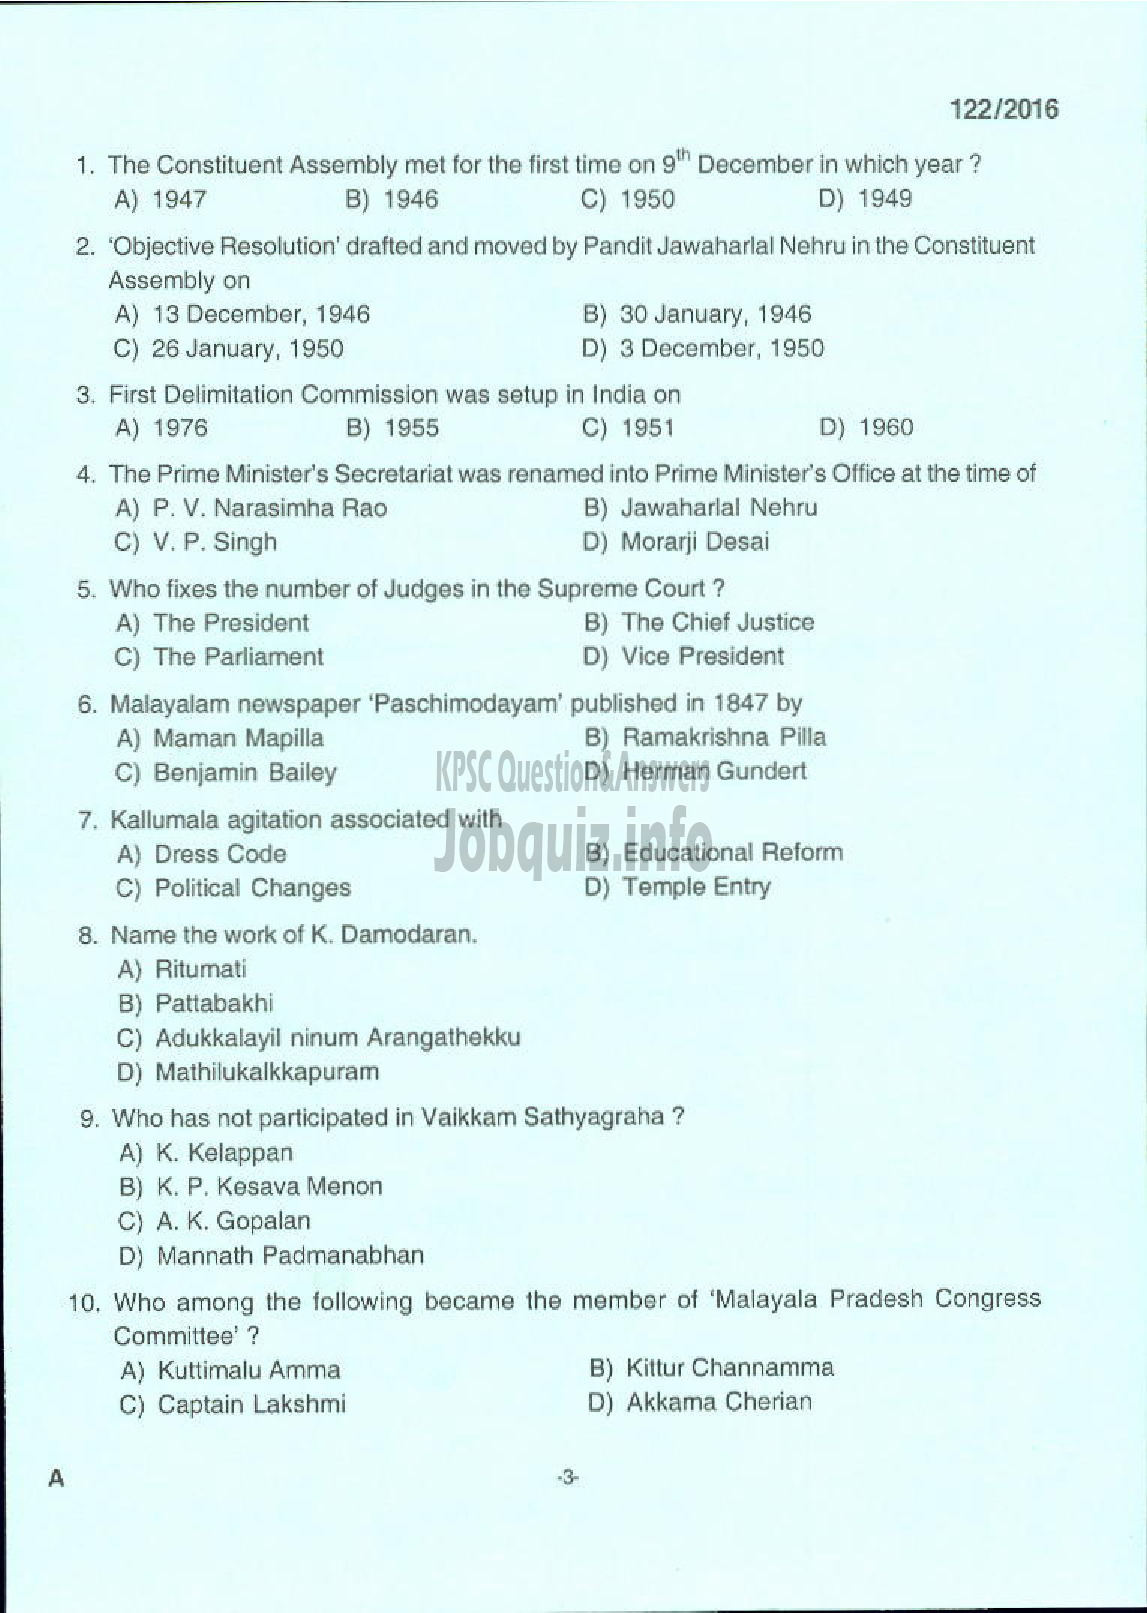 Kerala PSC Question Paper - ASSISTANT PROFESSOR MECHANICAL ENGINEERING TECHNICAL EDUCATION ENGINEERING DCOLLEGES-1